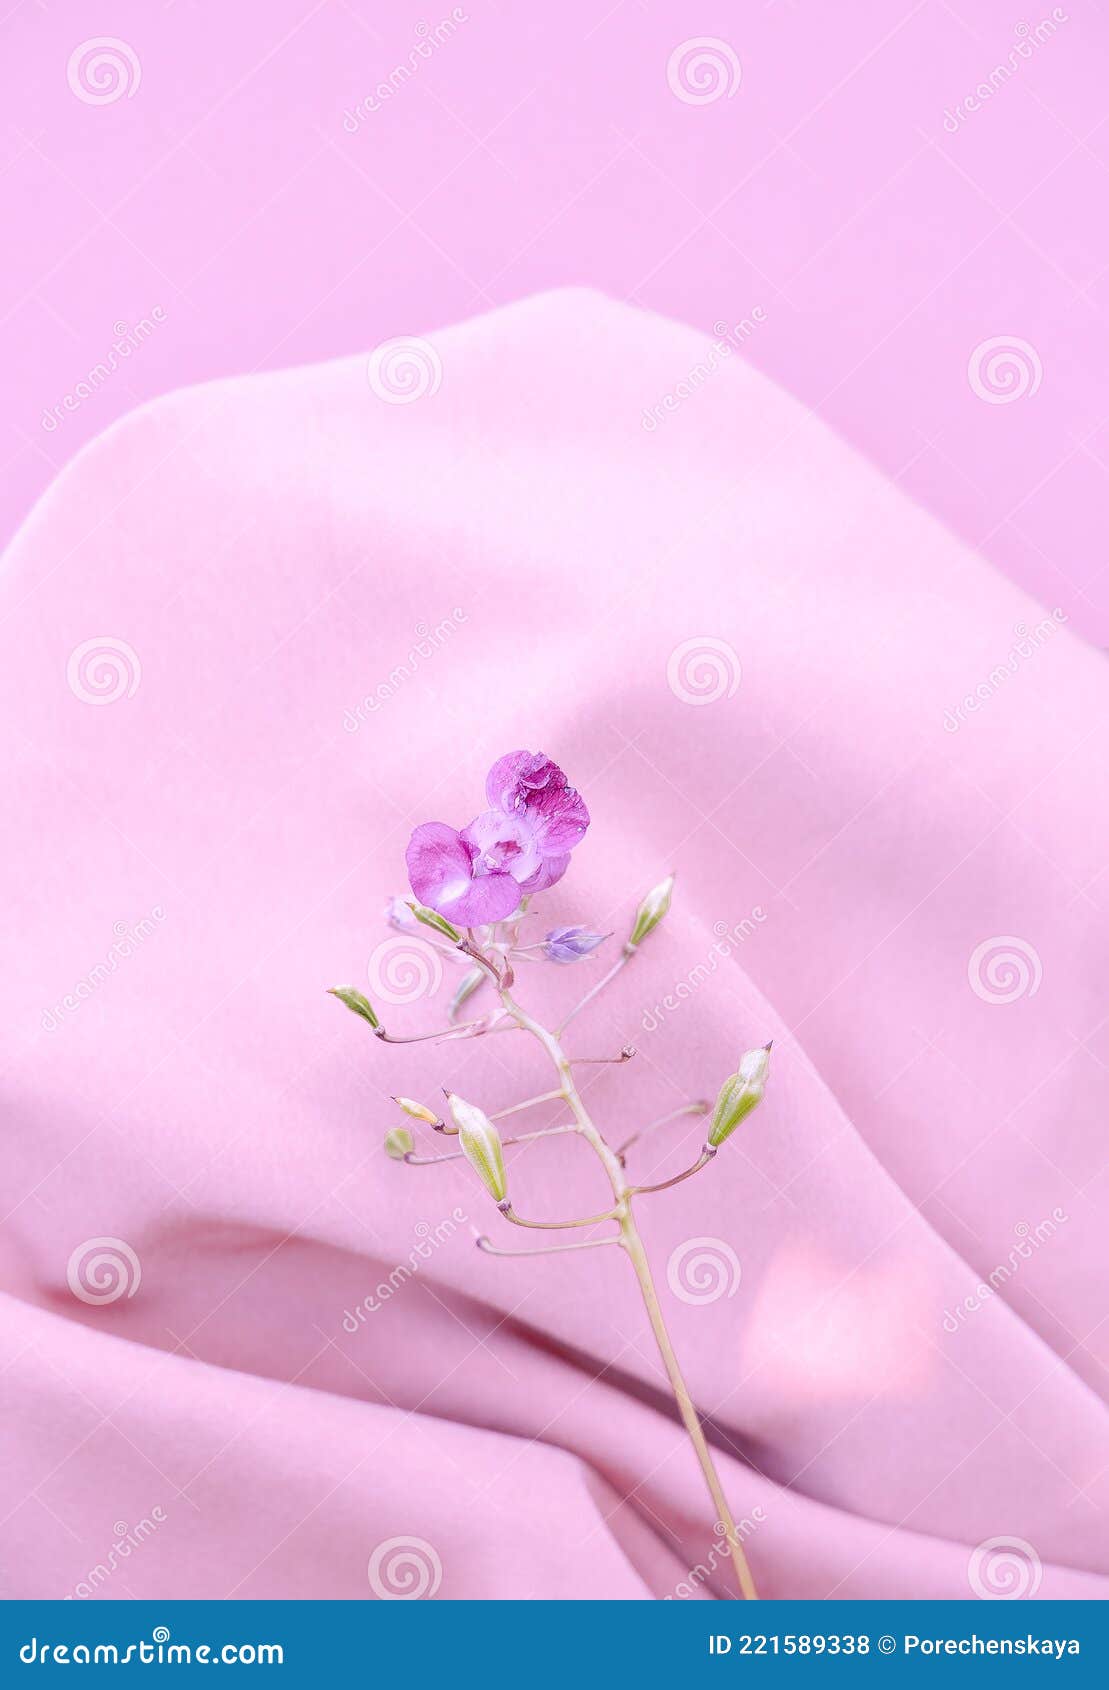 Purple Flower on Pink Silk Fabric Background. Aesthetic Minimal Wallpaper.  Summer Spring Floral Plant Composition Stock Photo - Image of pink, plant:  221589338